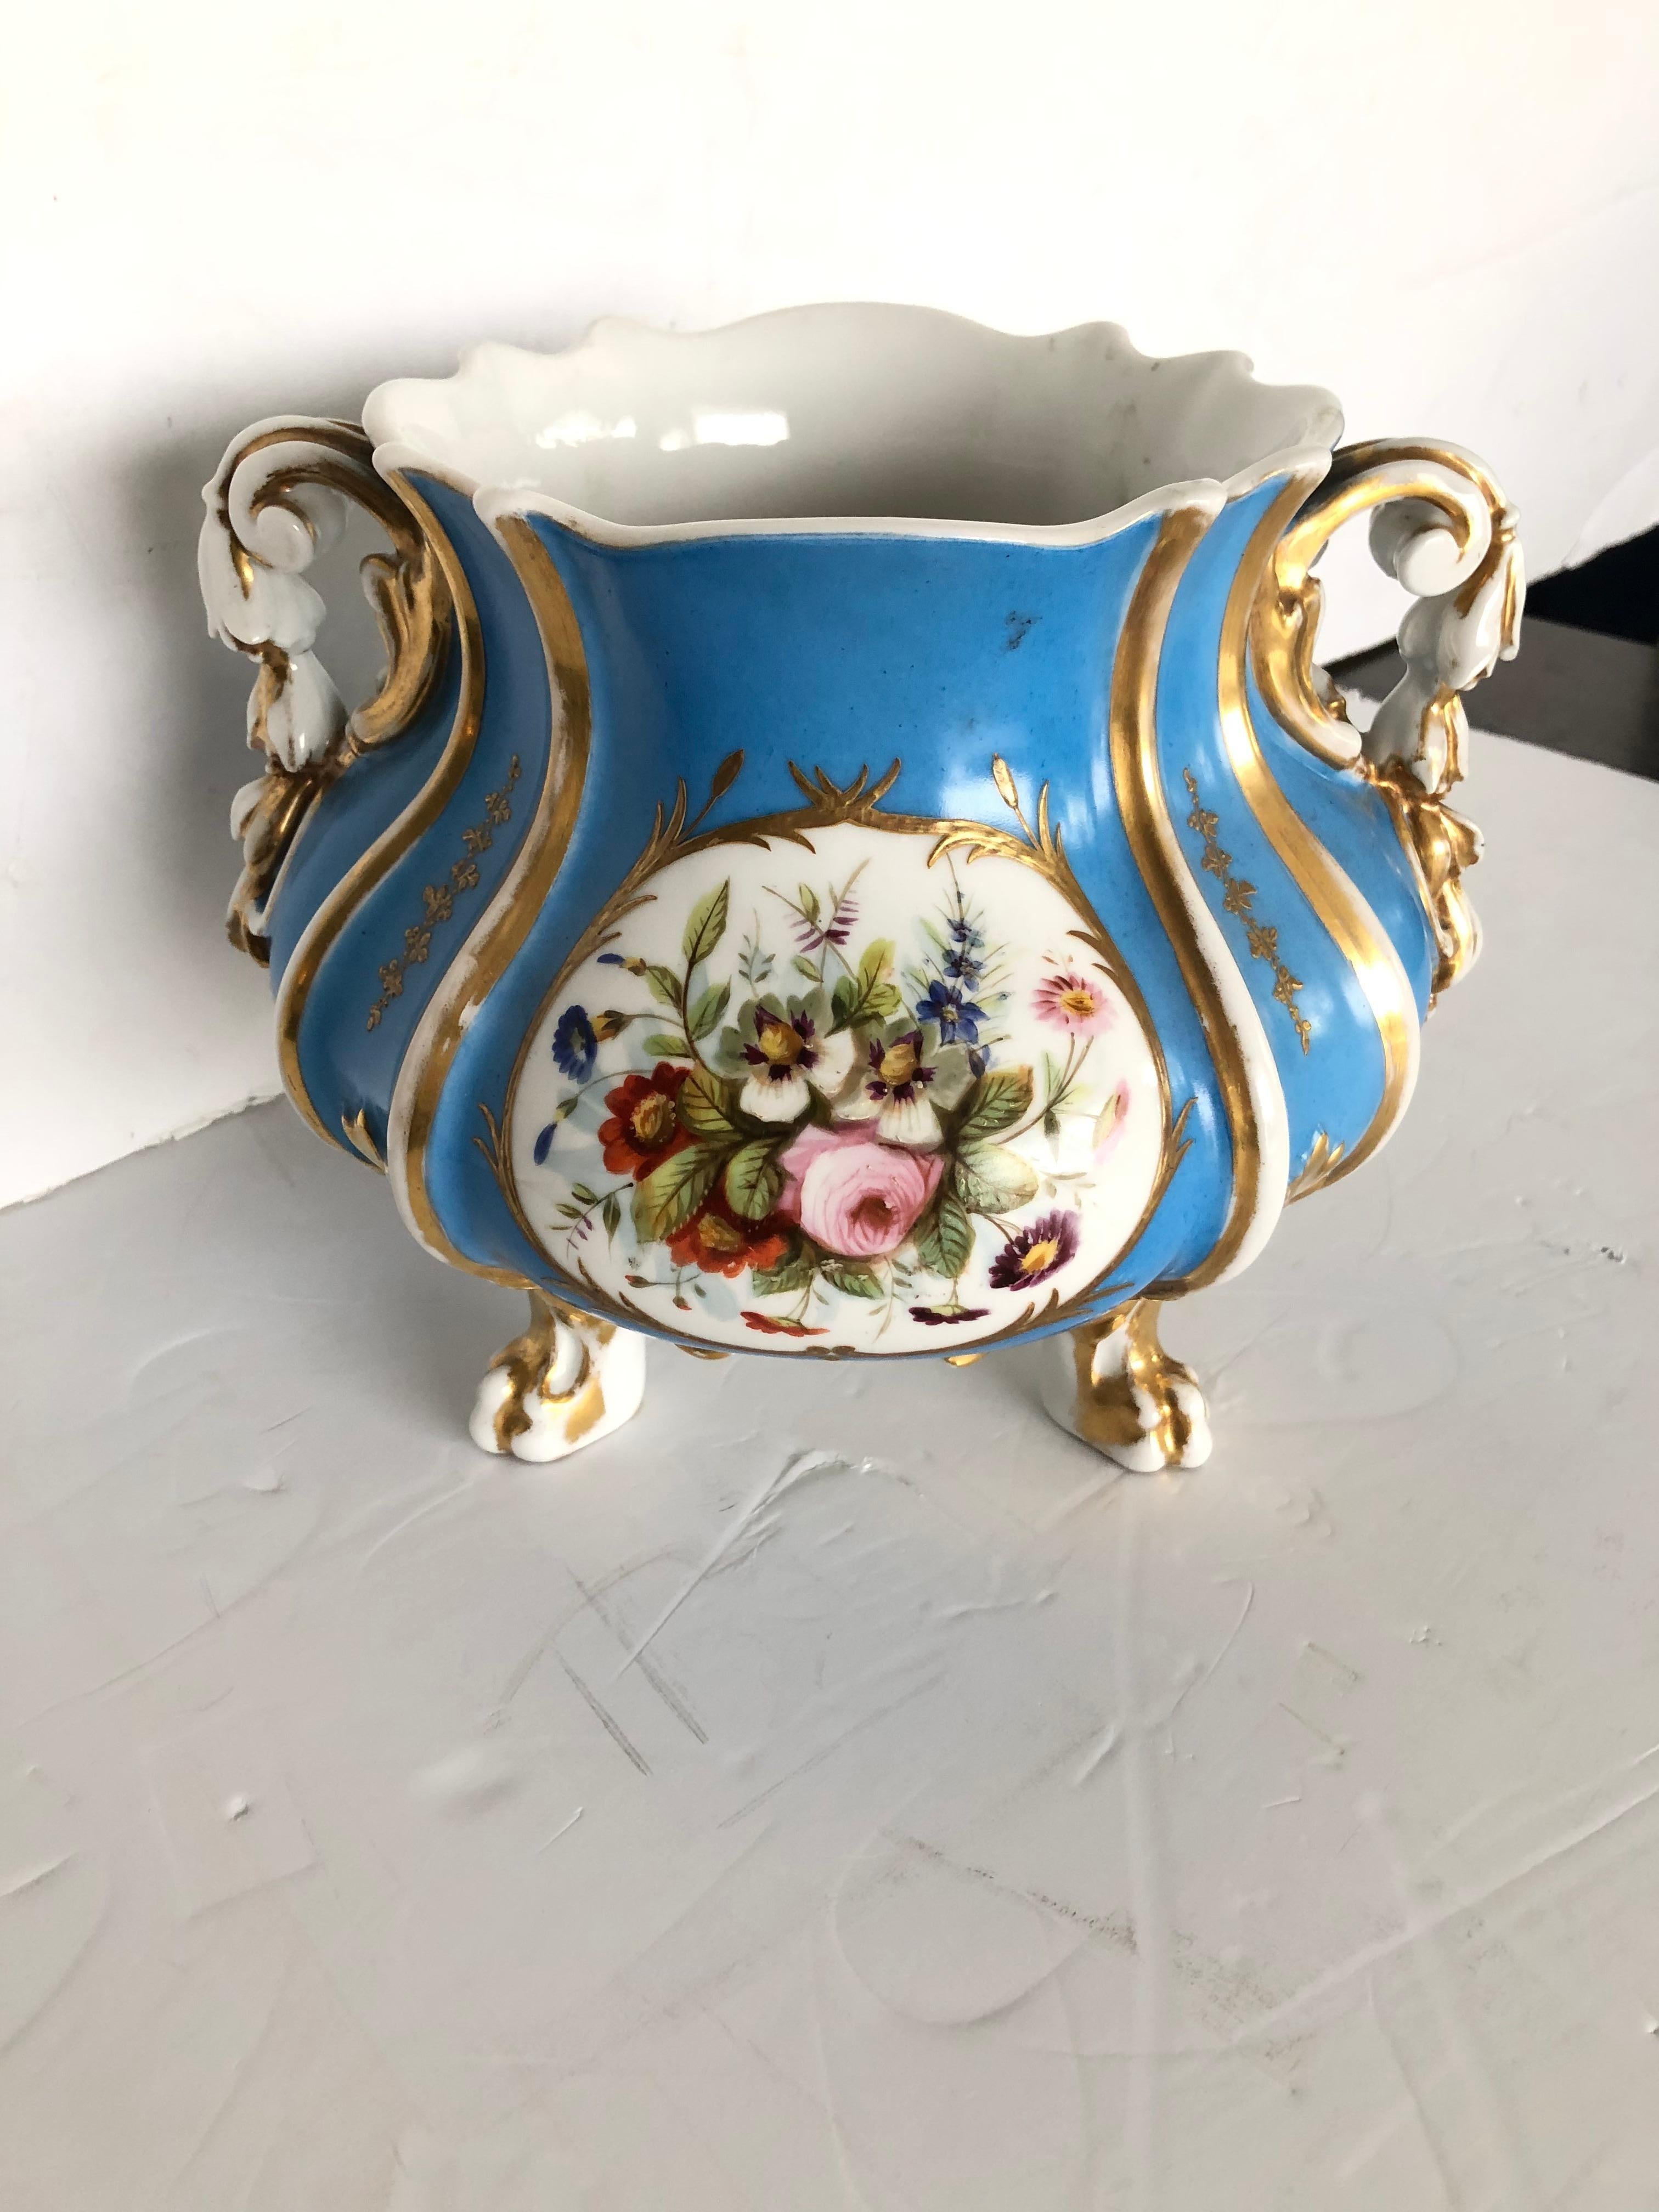 Collectible Old Paris porcelain bowl or vase having marvelous turquoise color, real gold leaf adornment and hand painted meticulous renderings of figures and flowers. Scrolly handles and gestural feet are lovely touches.